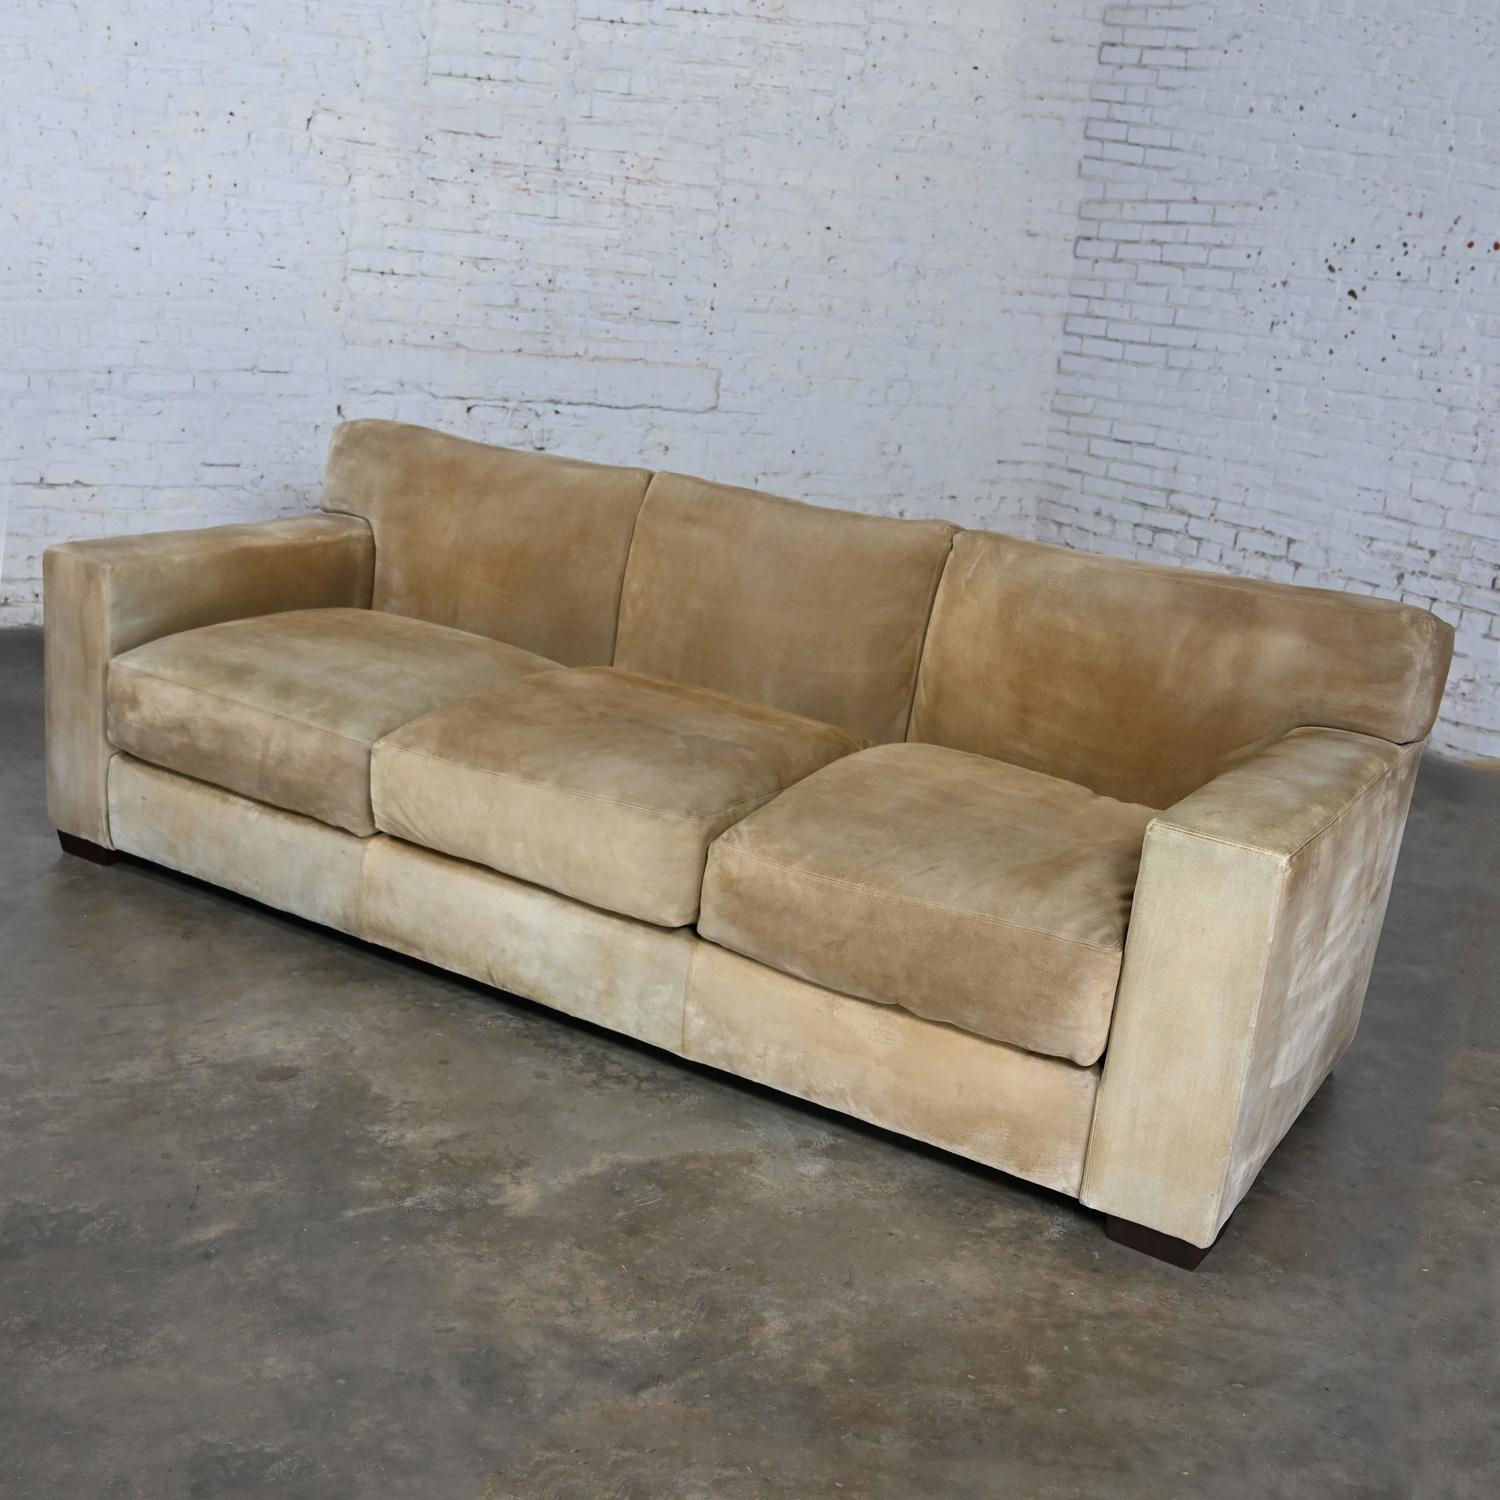 Marvelous vintage Lawson style sofa original buff suede leather by Ralph Lauren for Henredon. Three loose seat cushions comprised of 50% duck feather down & 50% polyester, sectioned tight back with T back cushions, and tapered block wood legs.